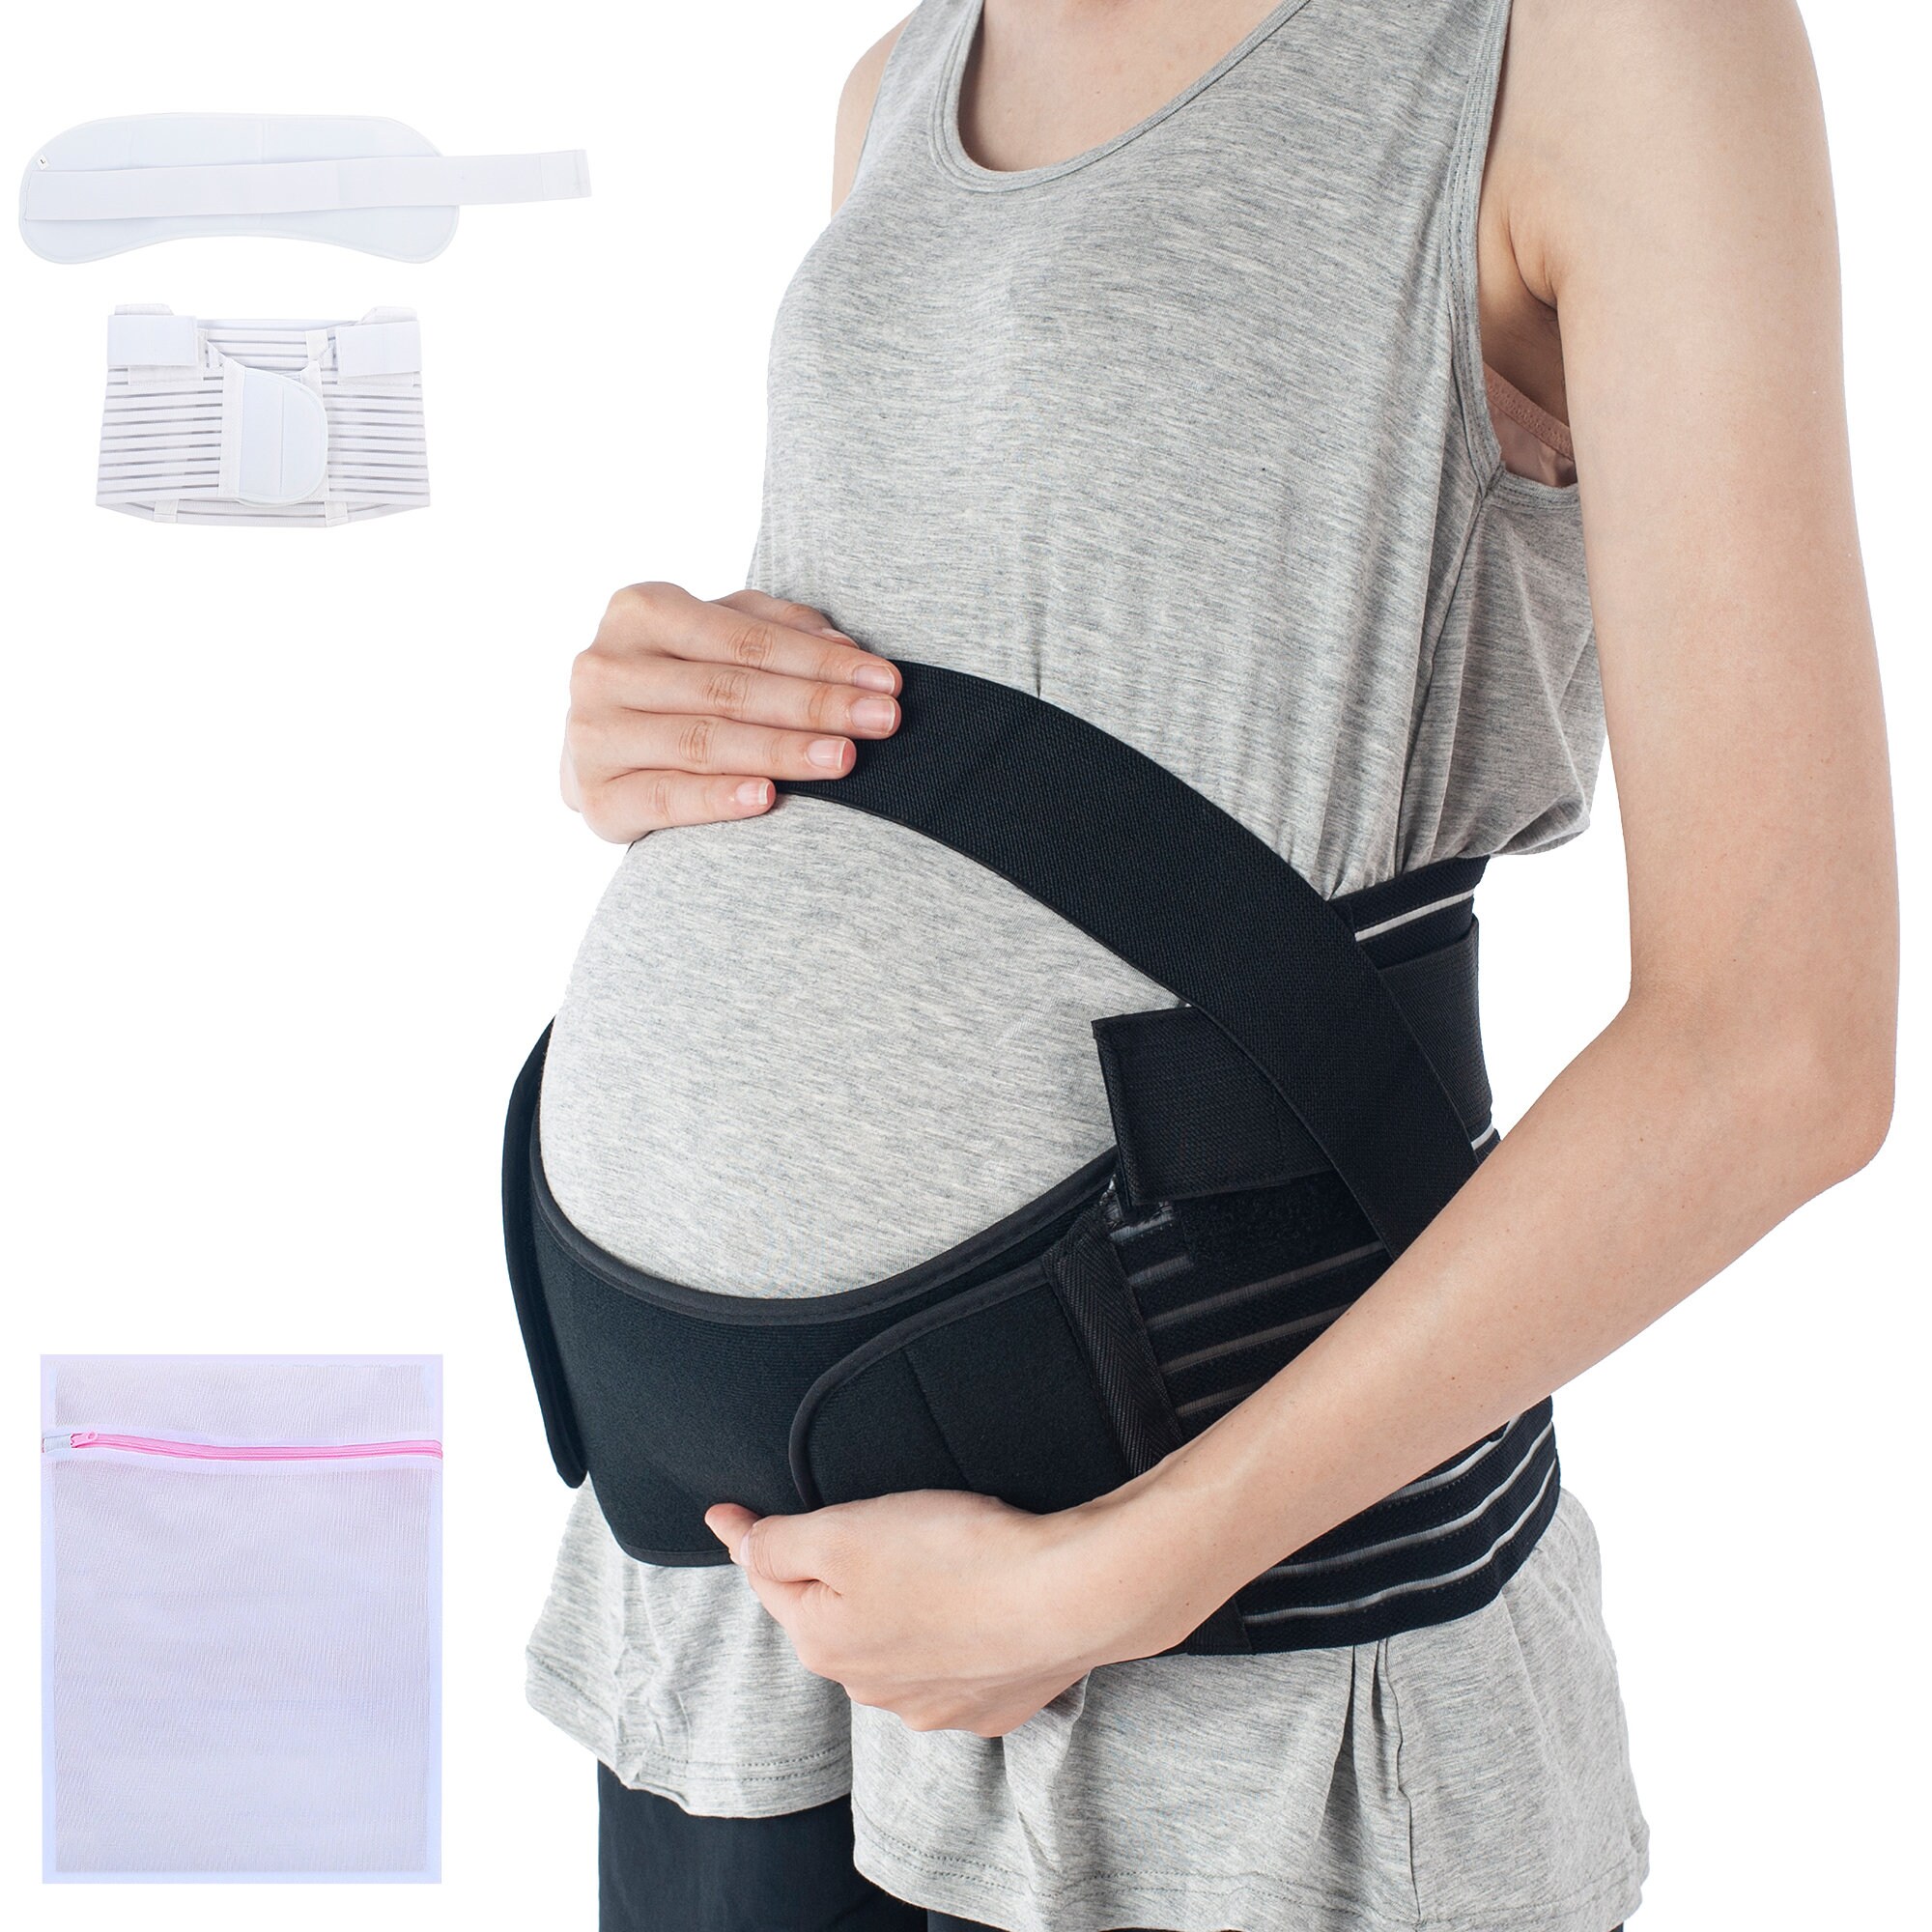 Corneliaa B31 Pregnancy Prenatal Maternity Belly Bands & Support Waist Back Care Athletic Bandage For Pregnant Women Girdle 